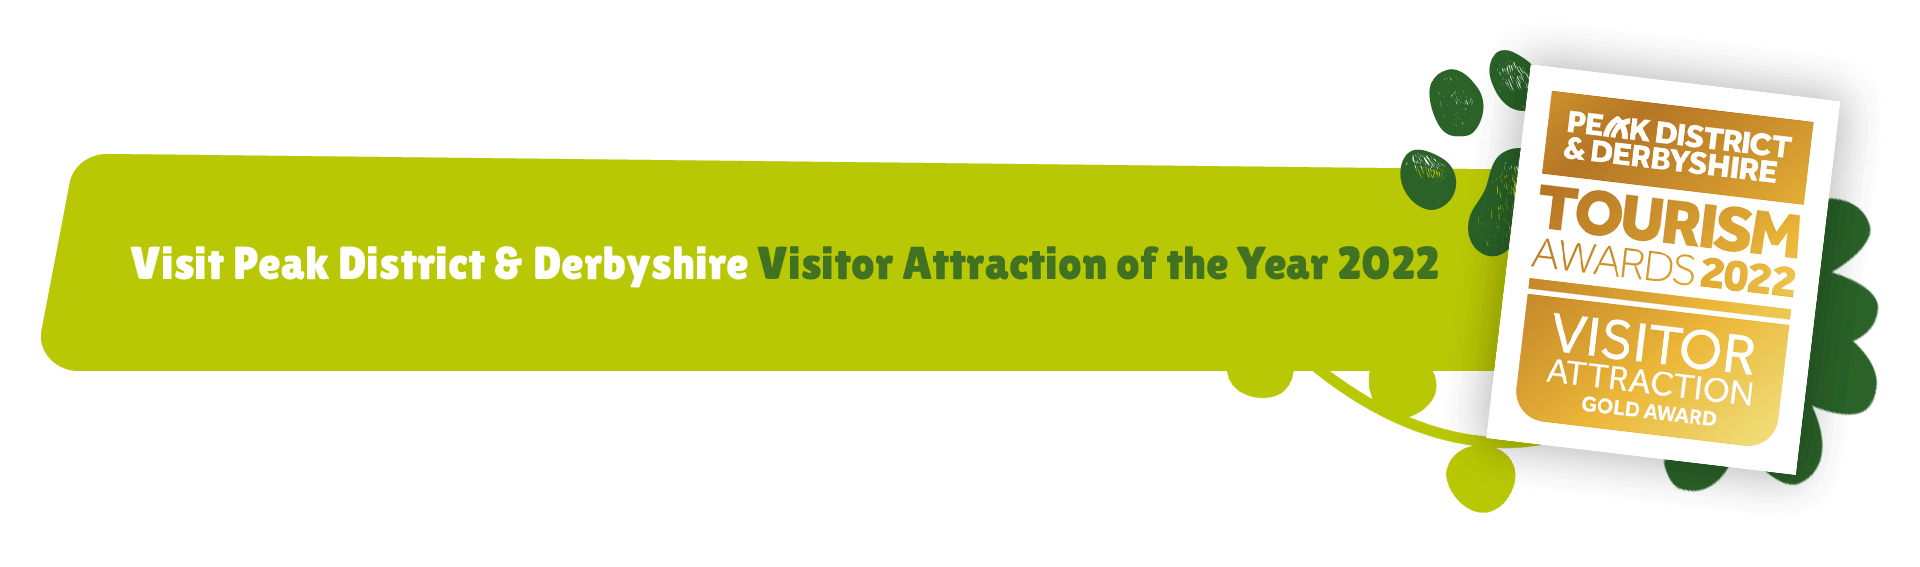 Visitor Attraction Gold Award 2022